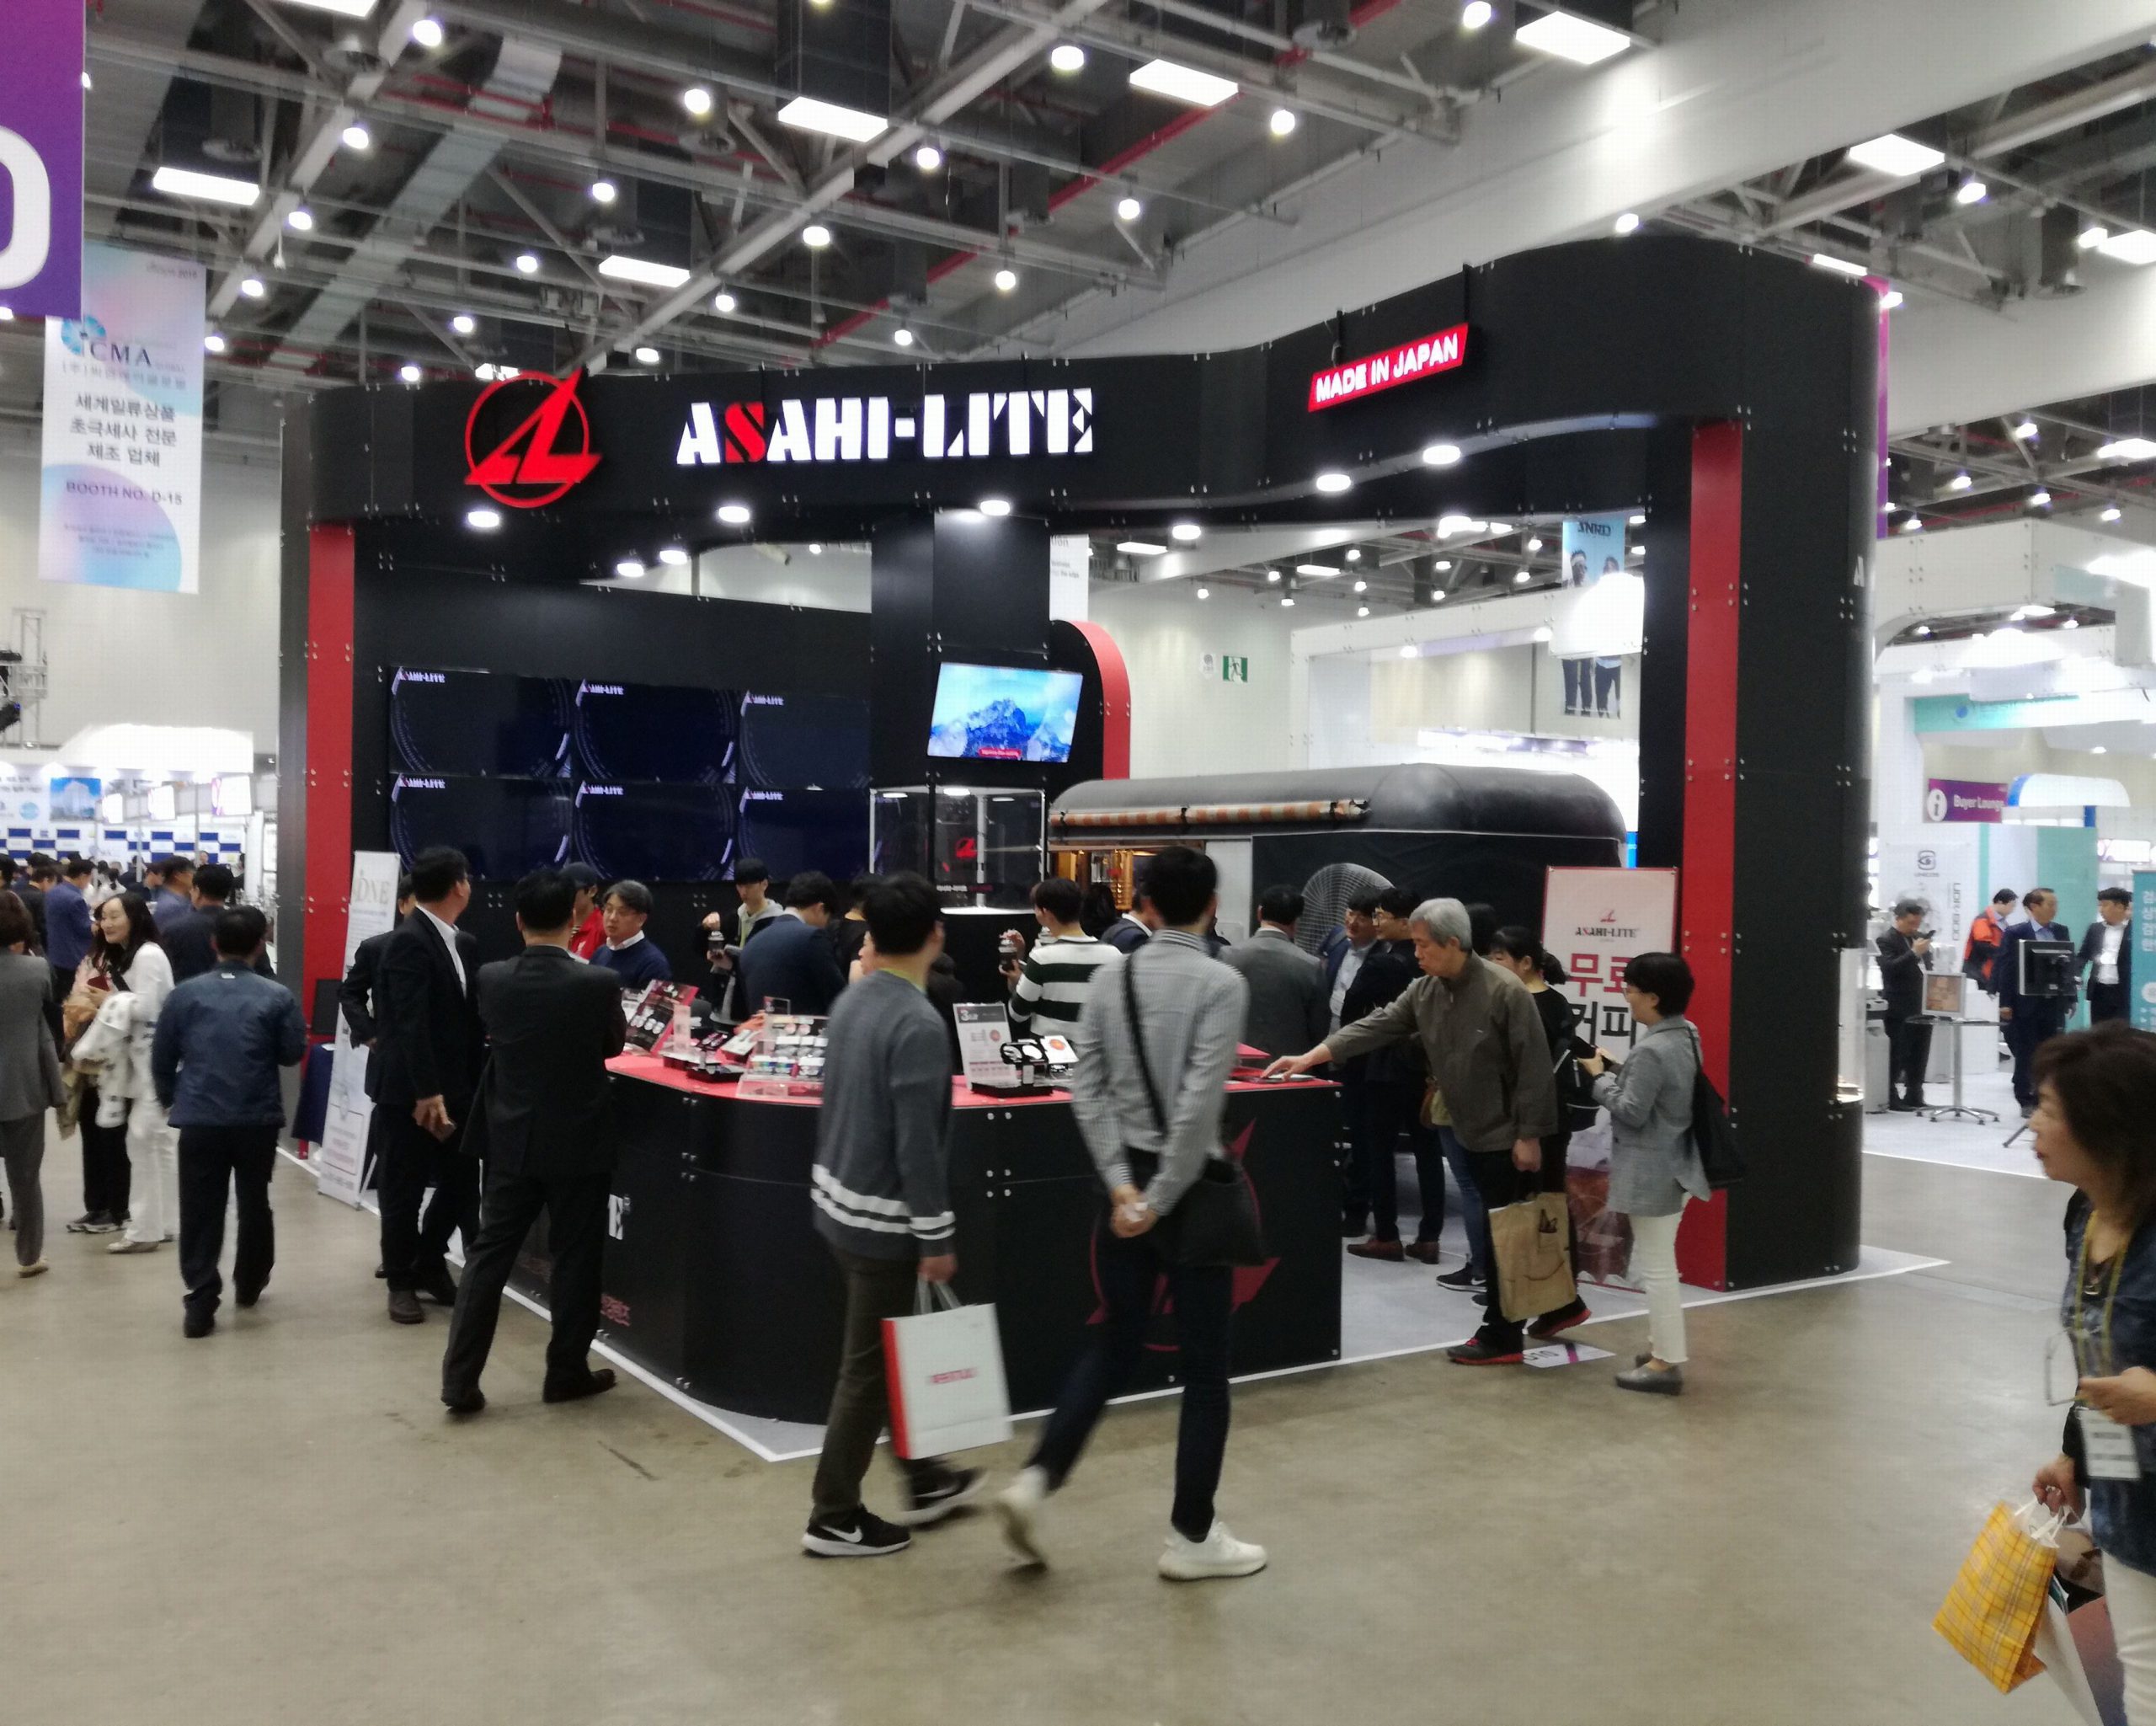 Asahi-Lite booth at exhibition